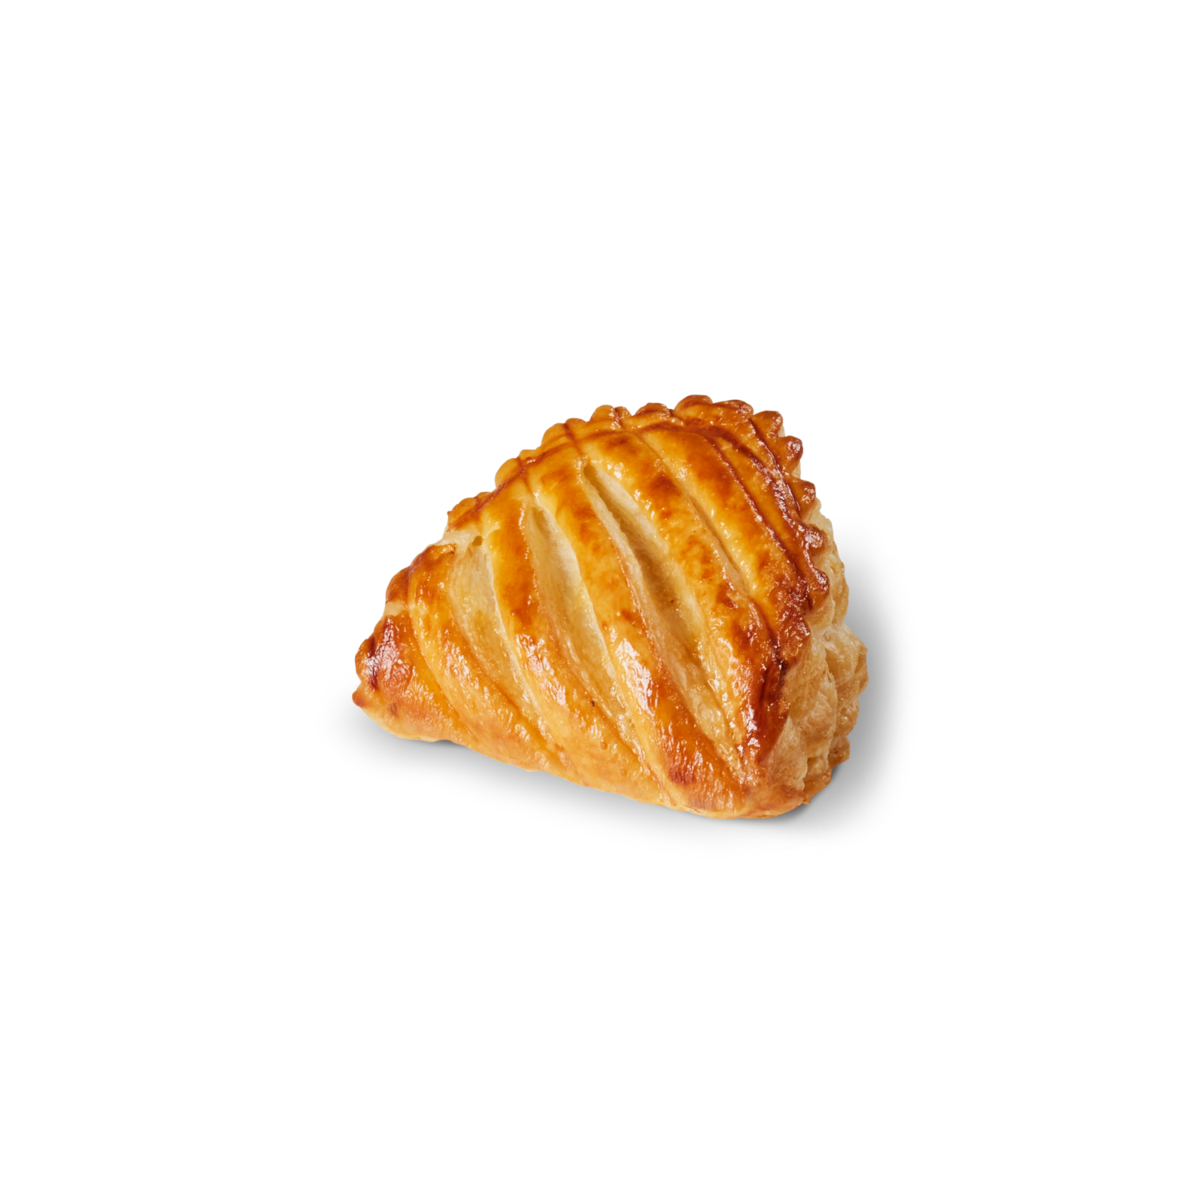 Chaussons aux pommes (apple turnovers)